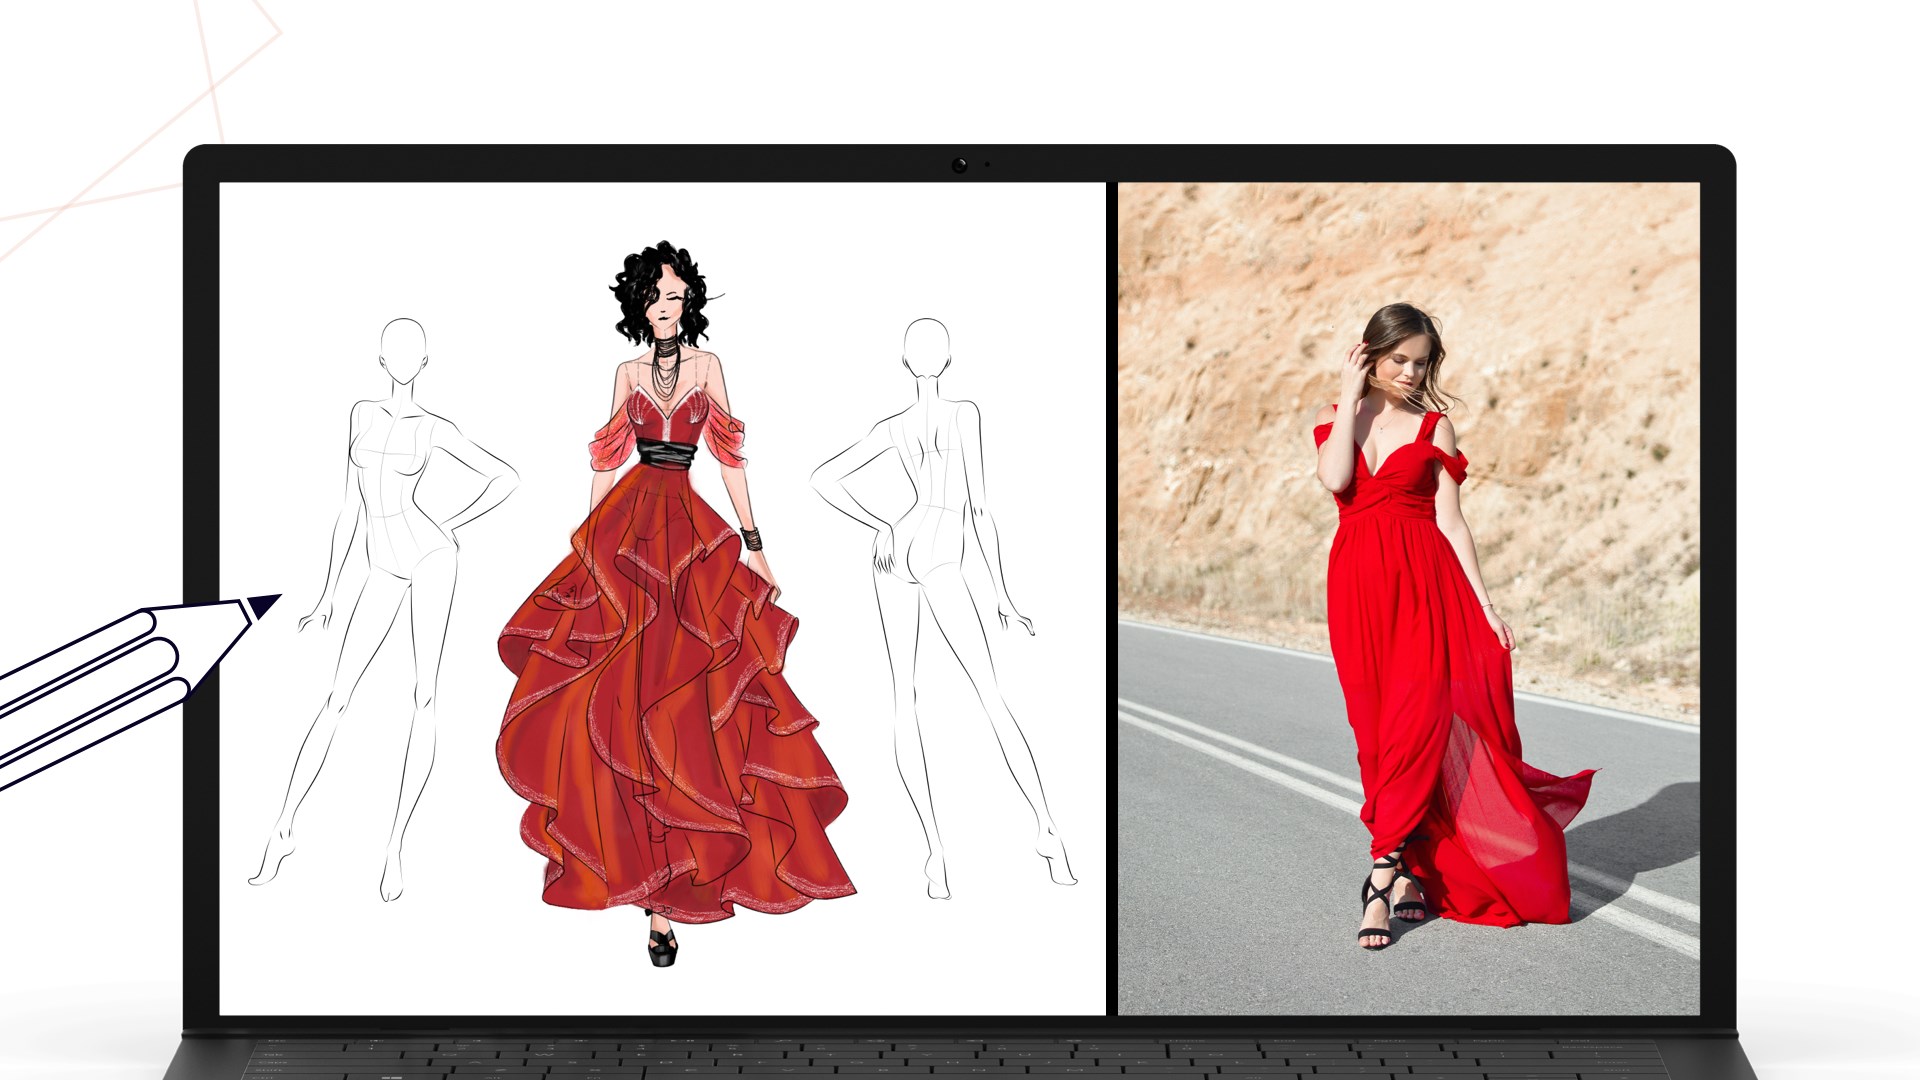 Fashion Drawings of Dresses and Gowns  Fashion illustration dresses,  Fashion illustration sketches dresses, Fashion design sketches